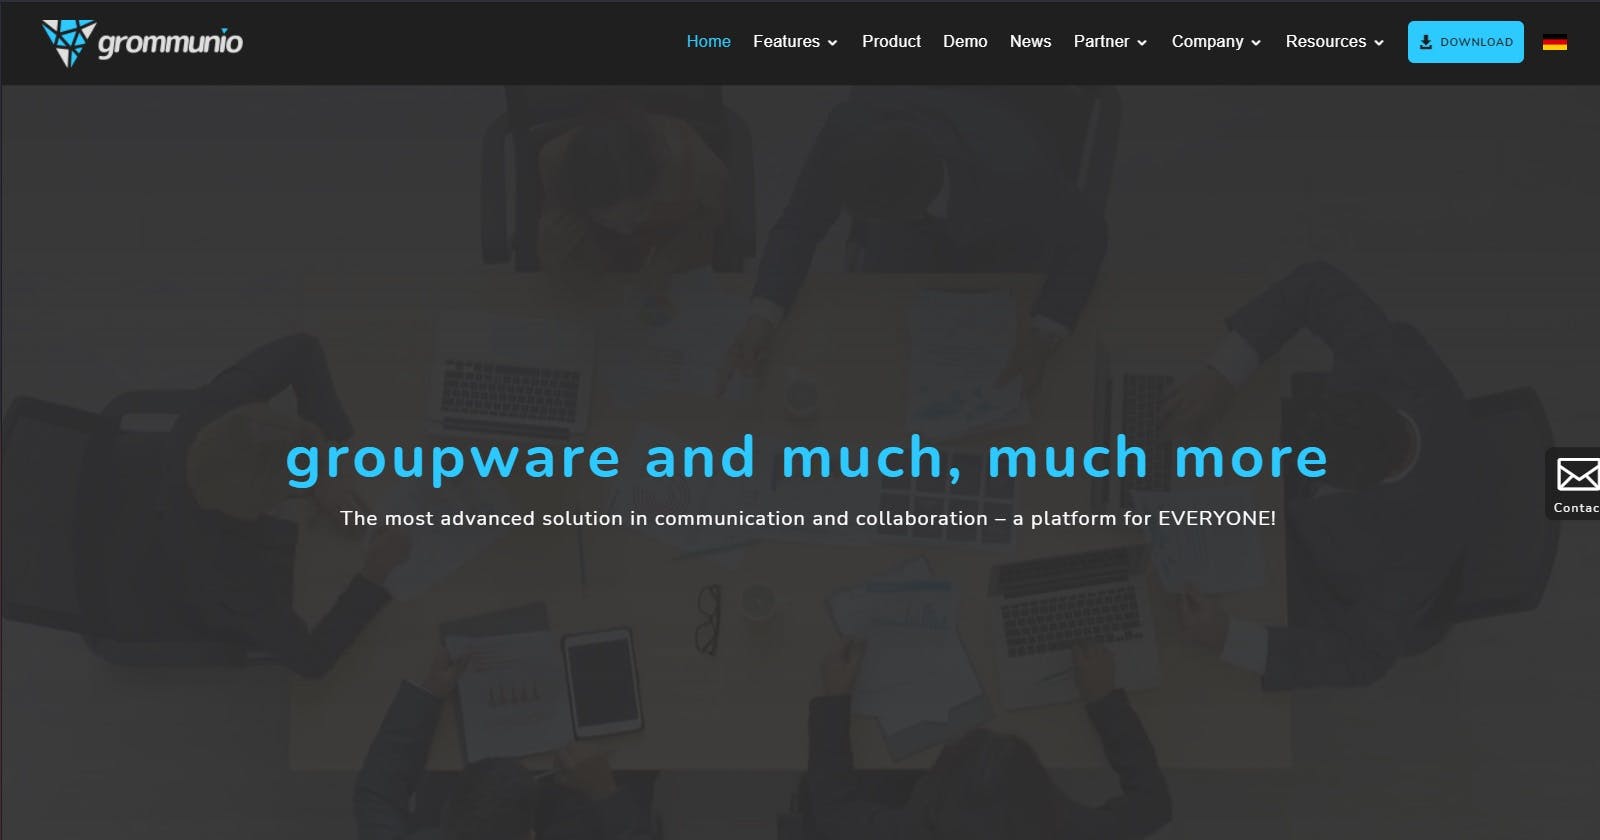 grommunio ֎ an open source groupware solution capable of replacing Exchange+ • install guide •